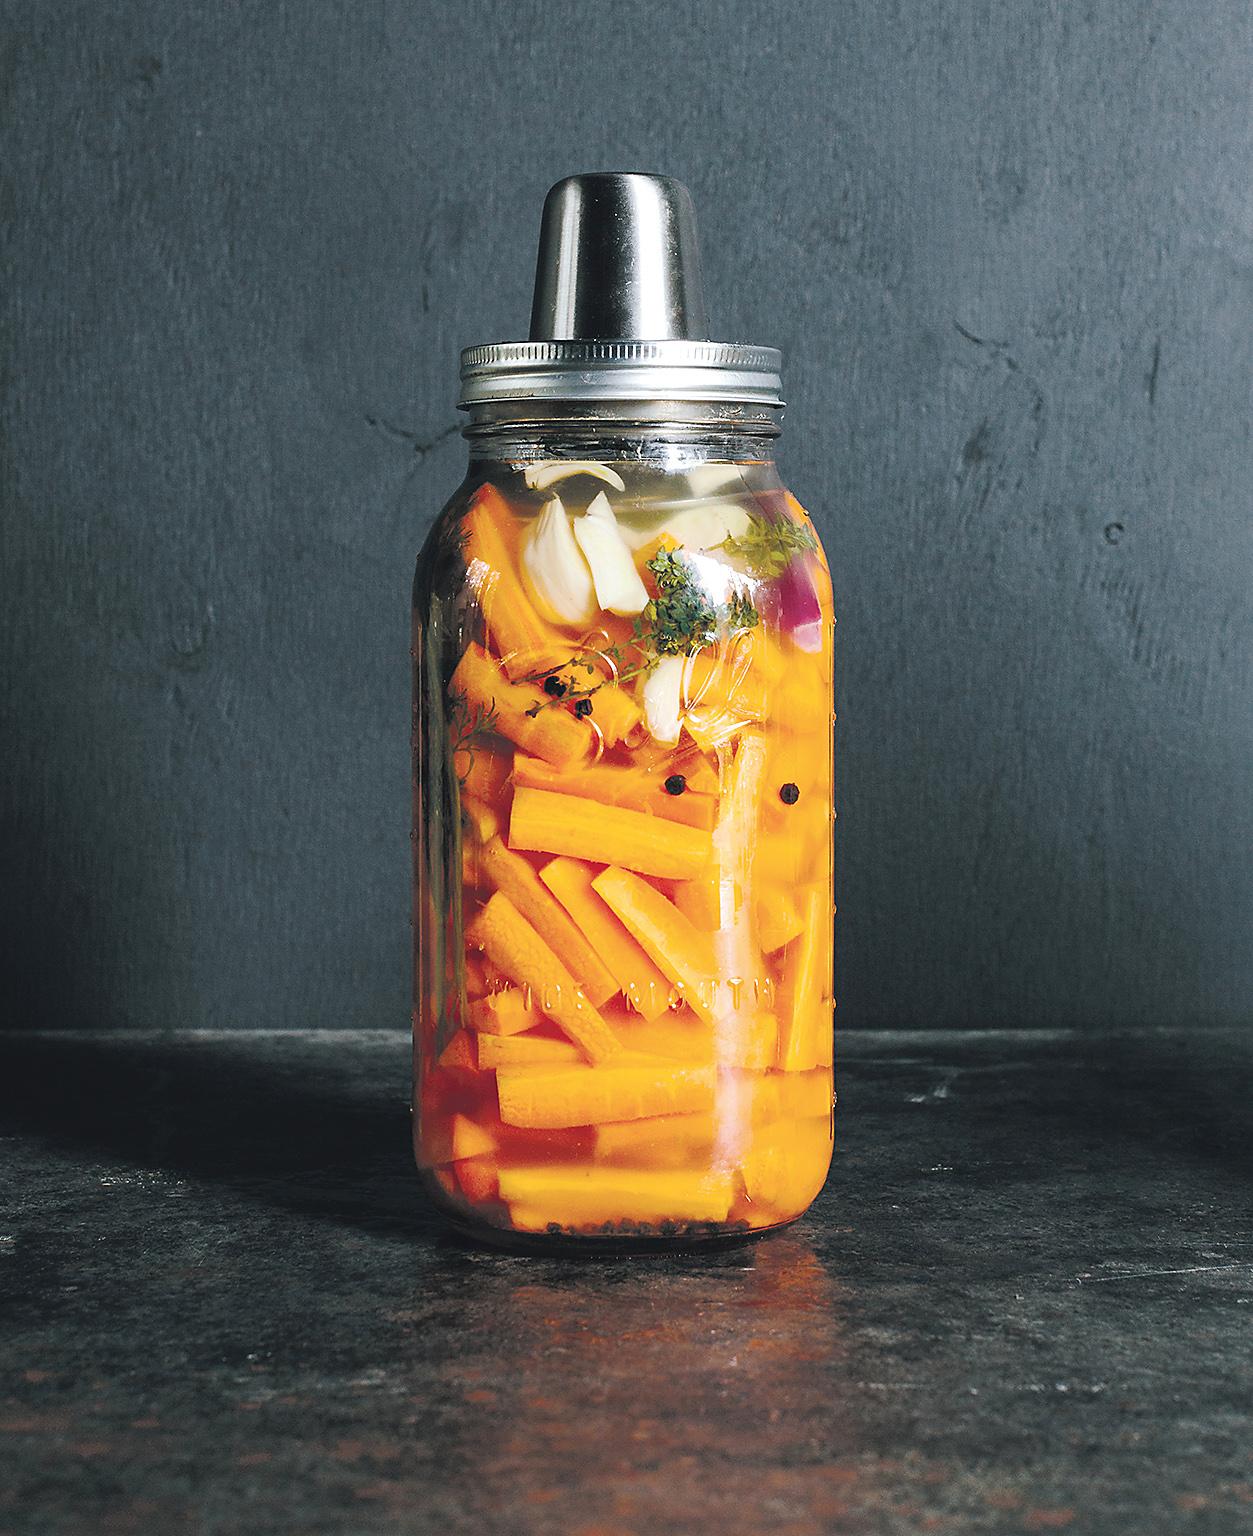 Fermentation relies on bacteria to do the preserving and the food remains raw